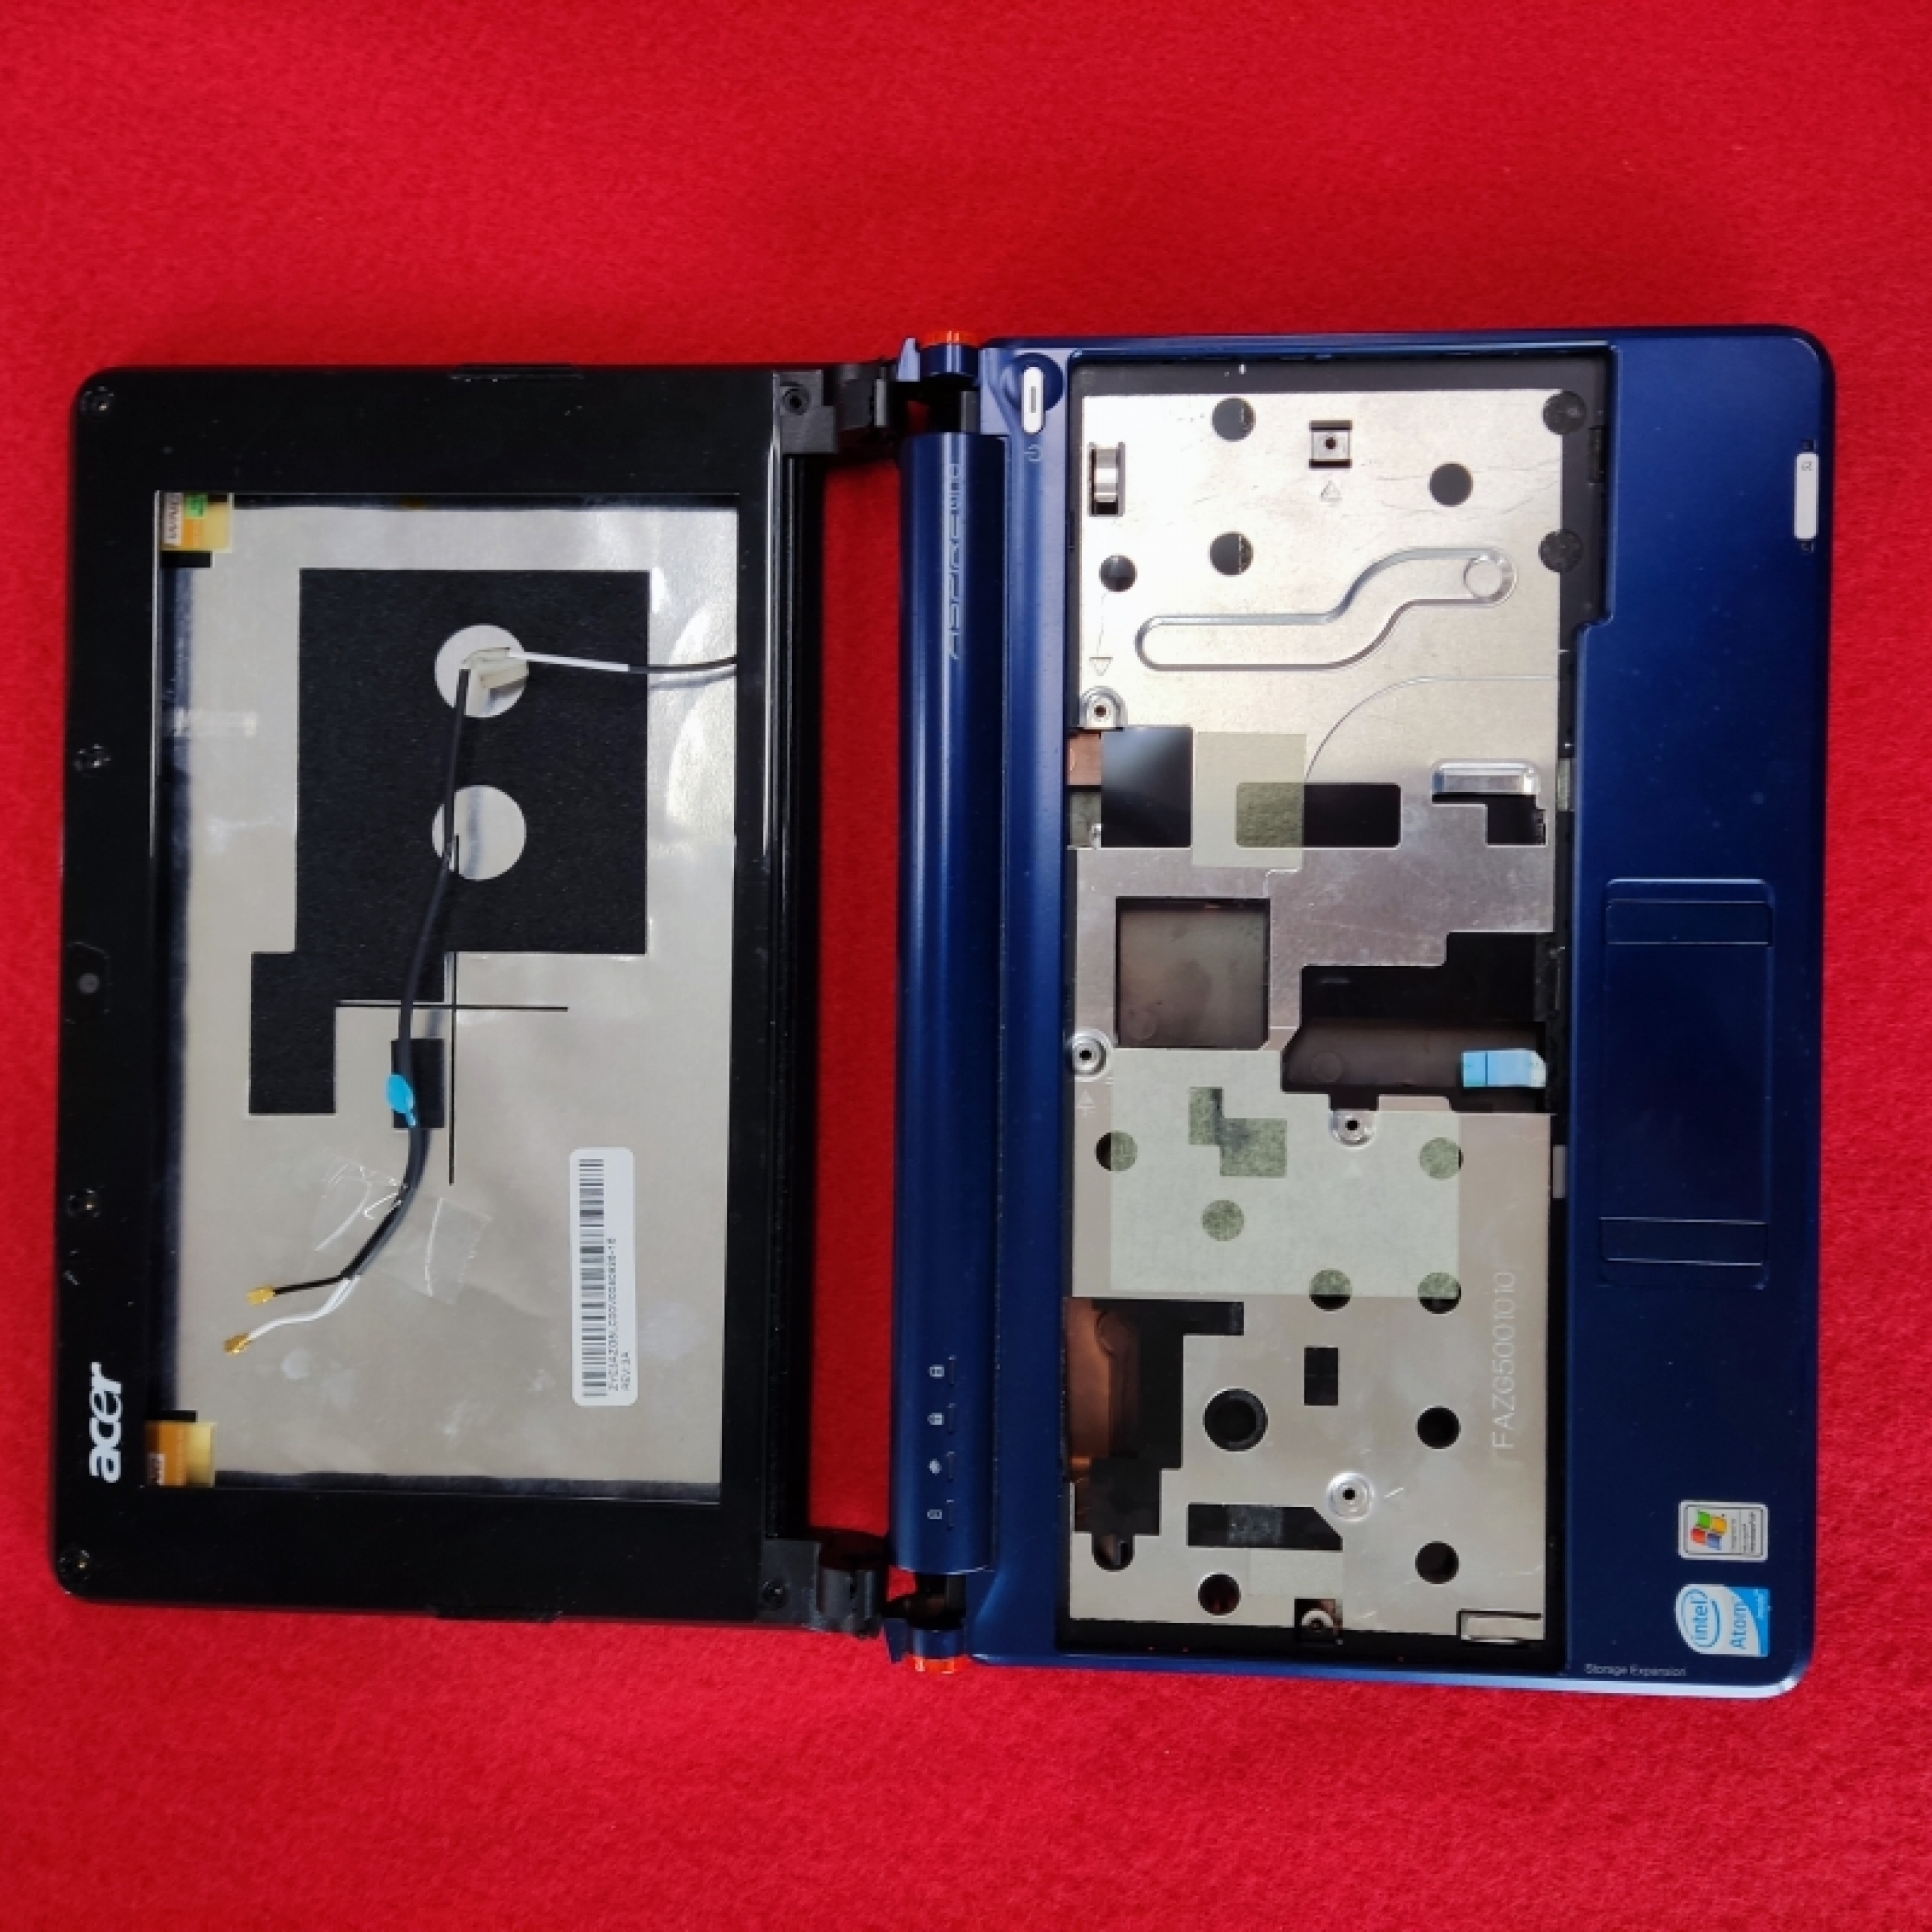 S5 Scocche complete Acer Aspire One ZG5 A0A 110-Bb